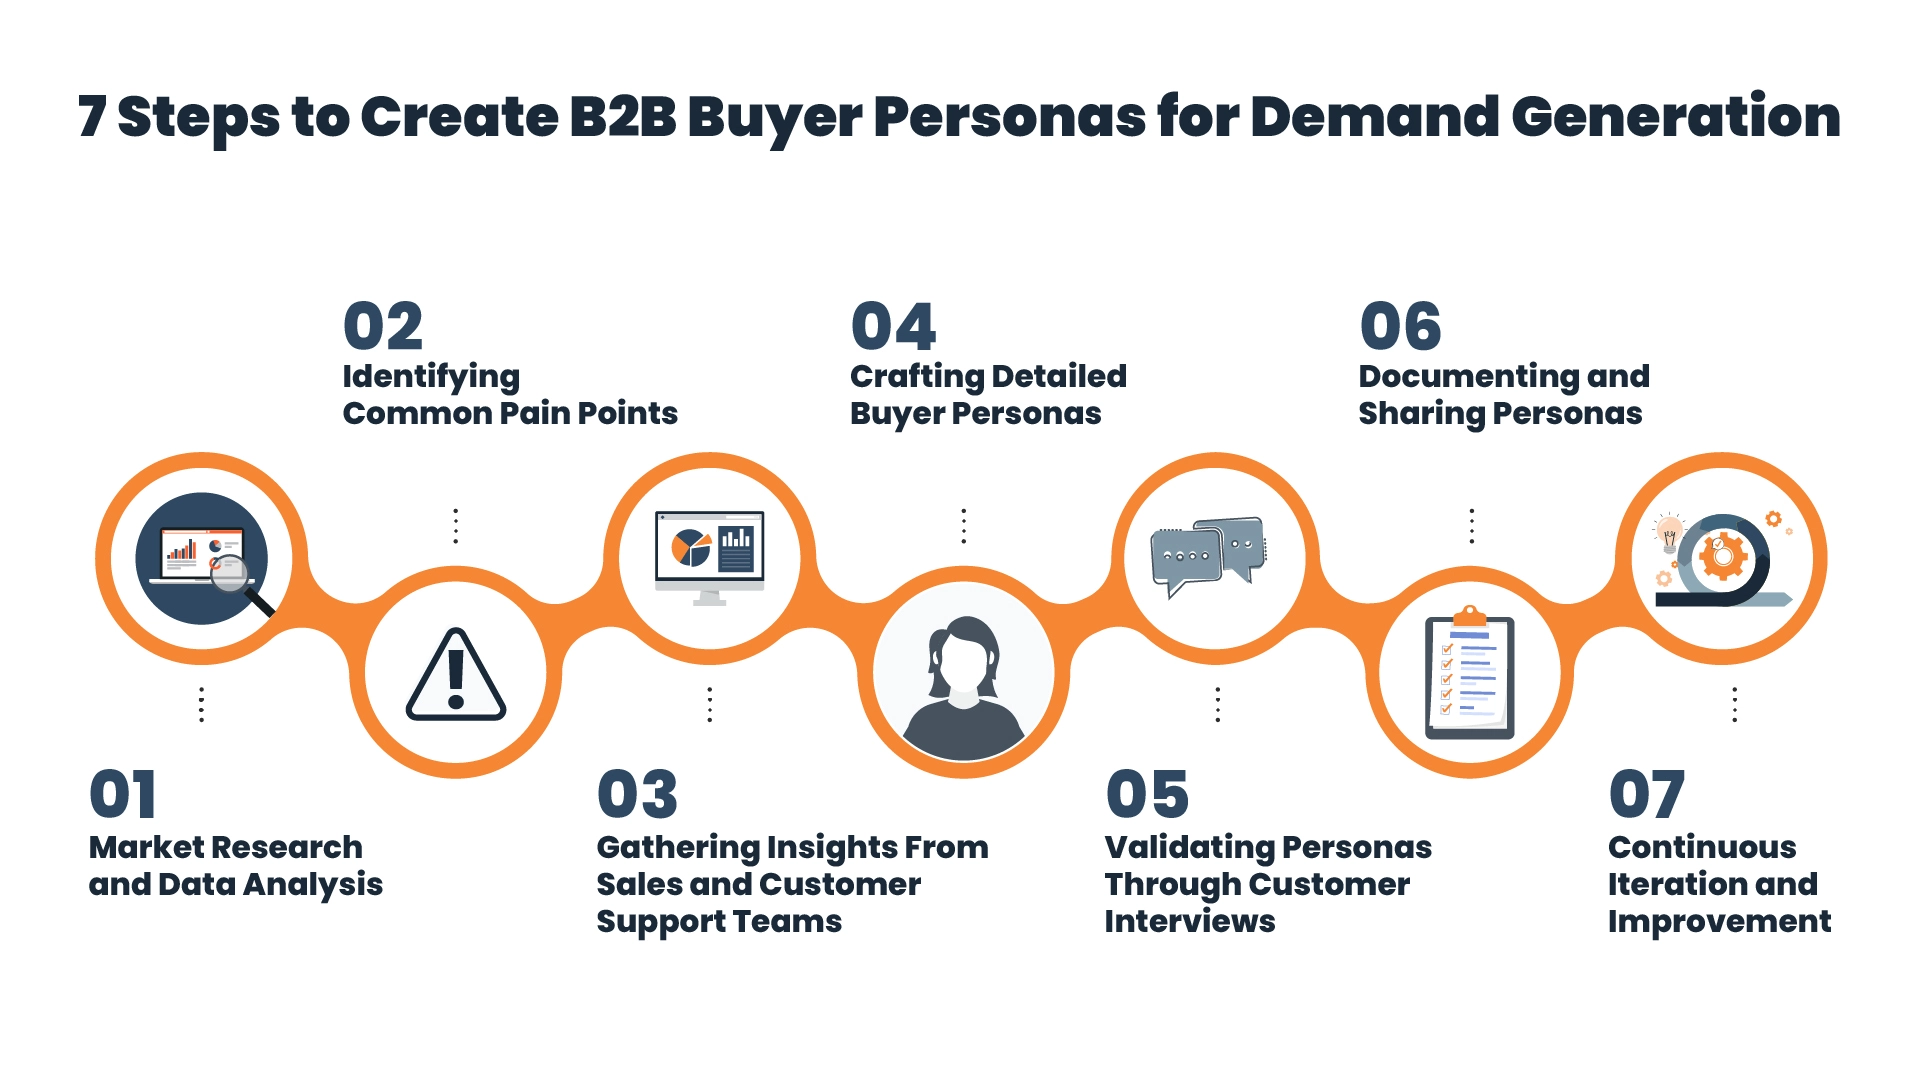 7 Steps to Create B2B Buyer Personas for Demand Generation